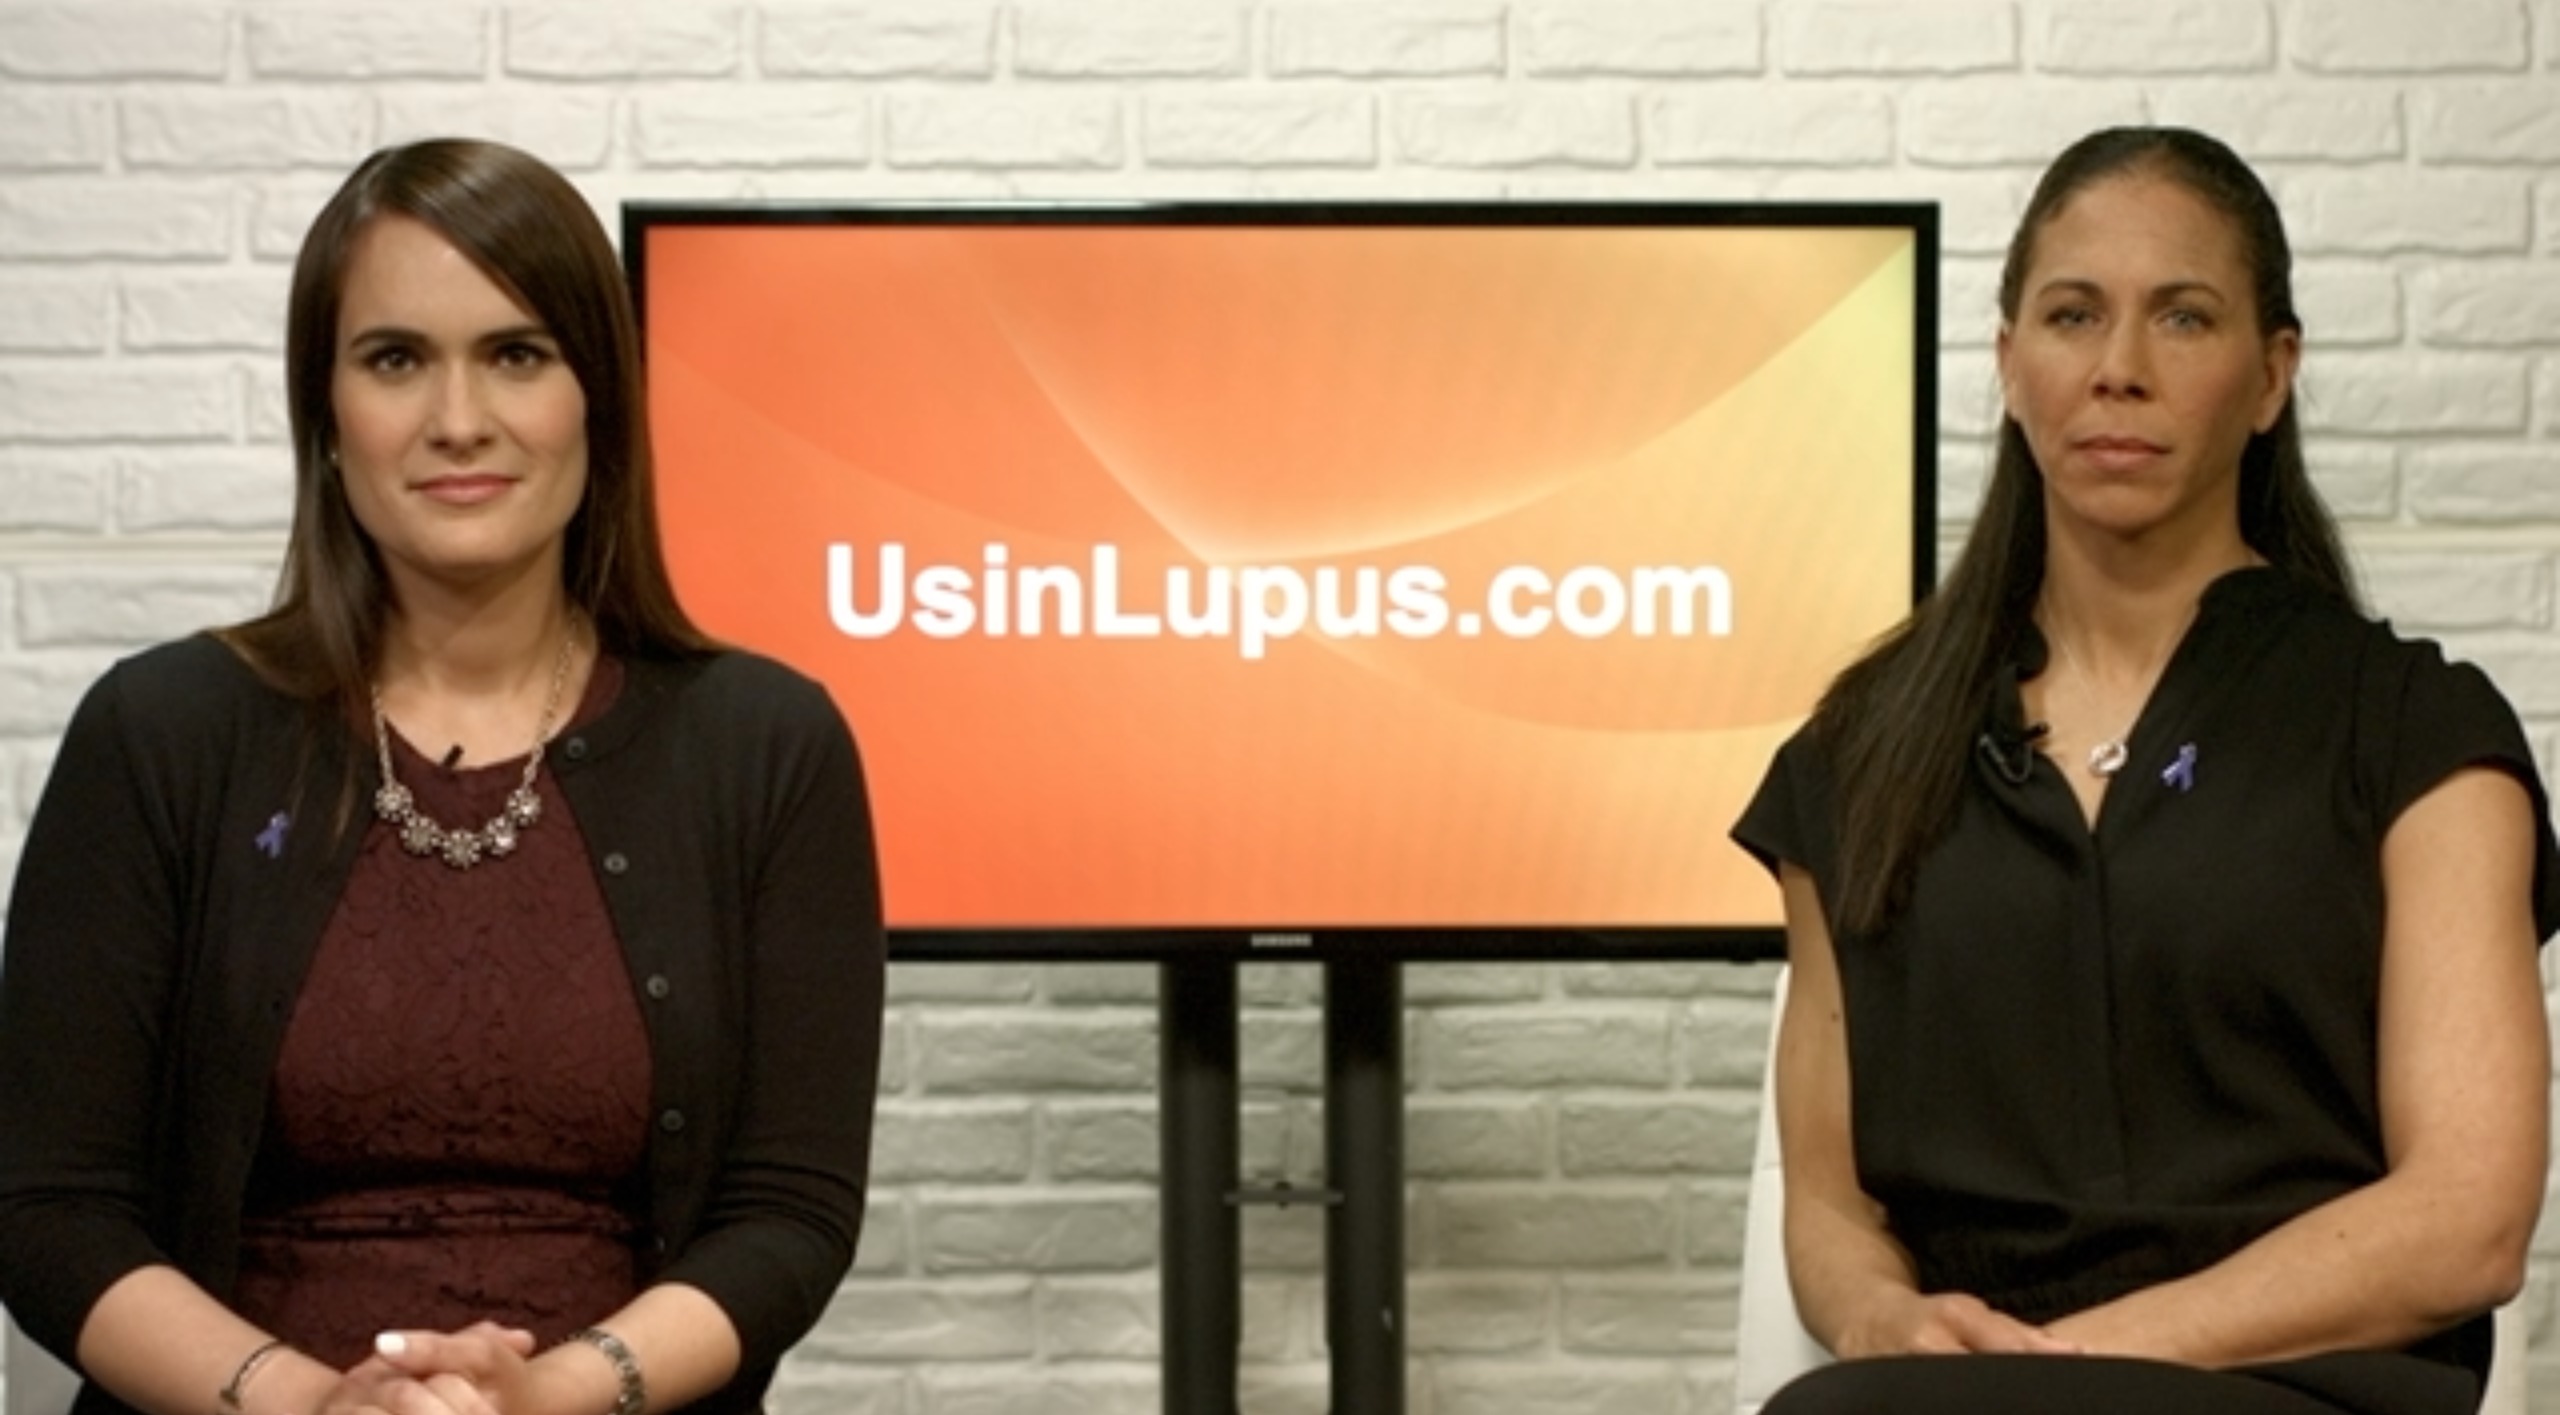 Living with Lupus - Shannon Boxx Shares Her Story